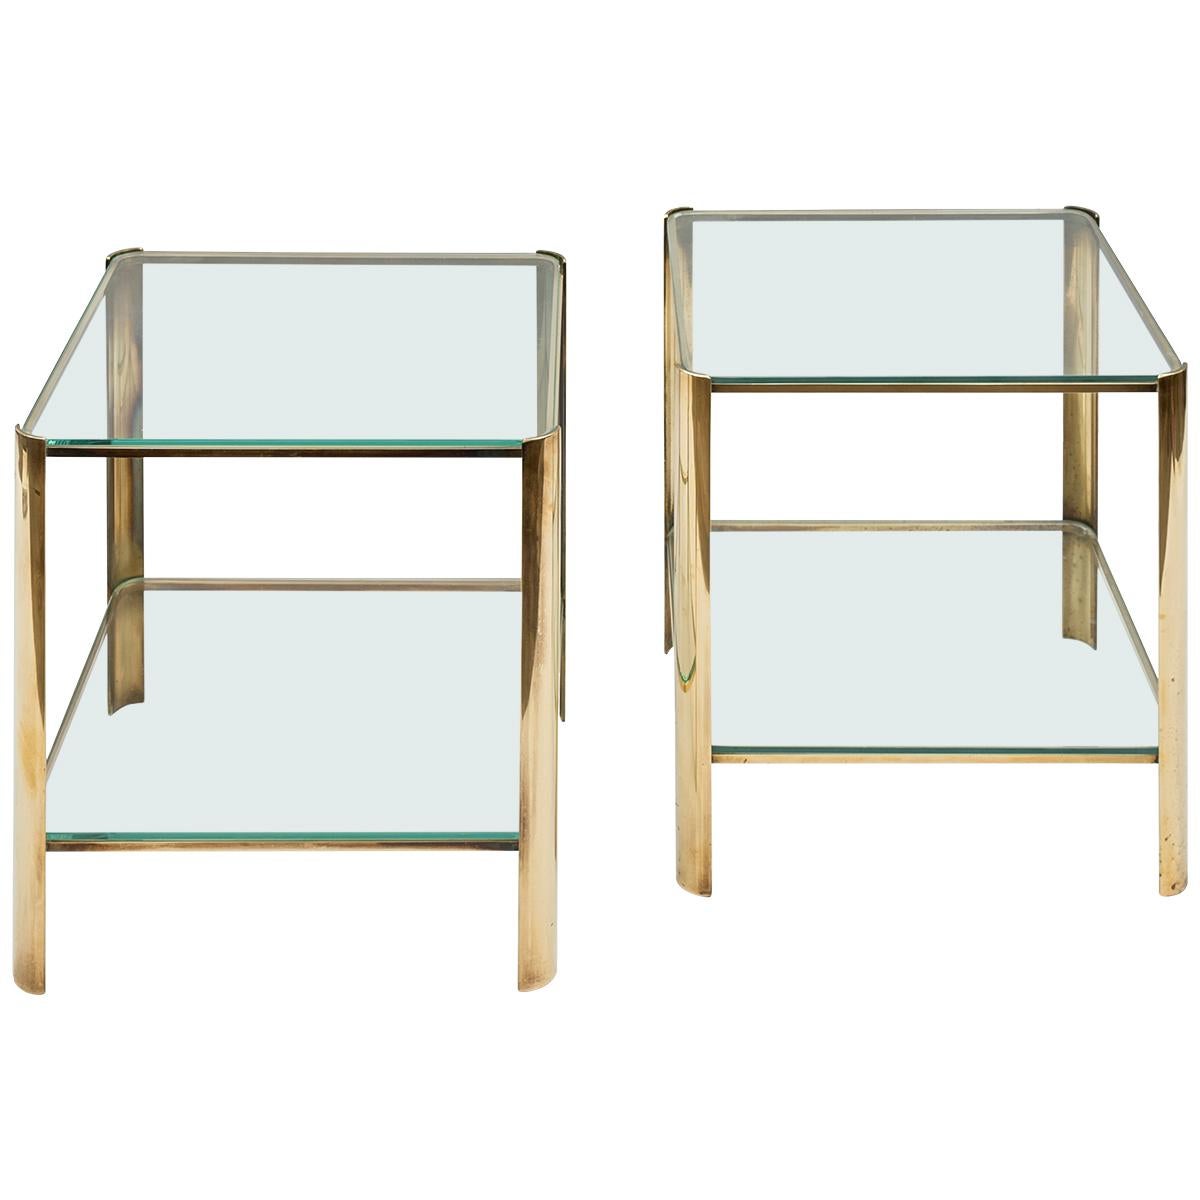 Pair of Side Tables by Maison Malabert